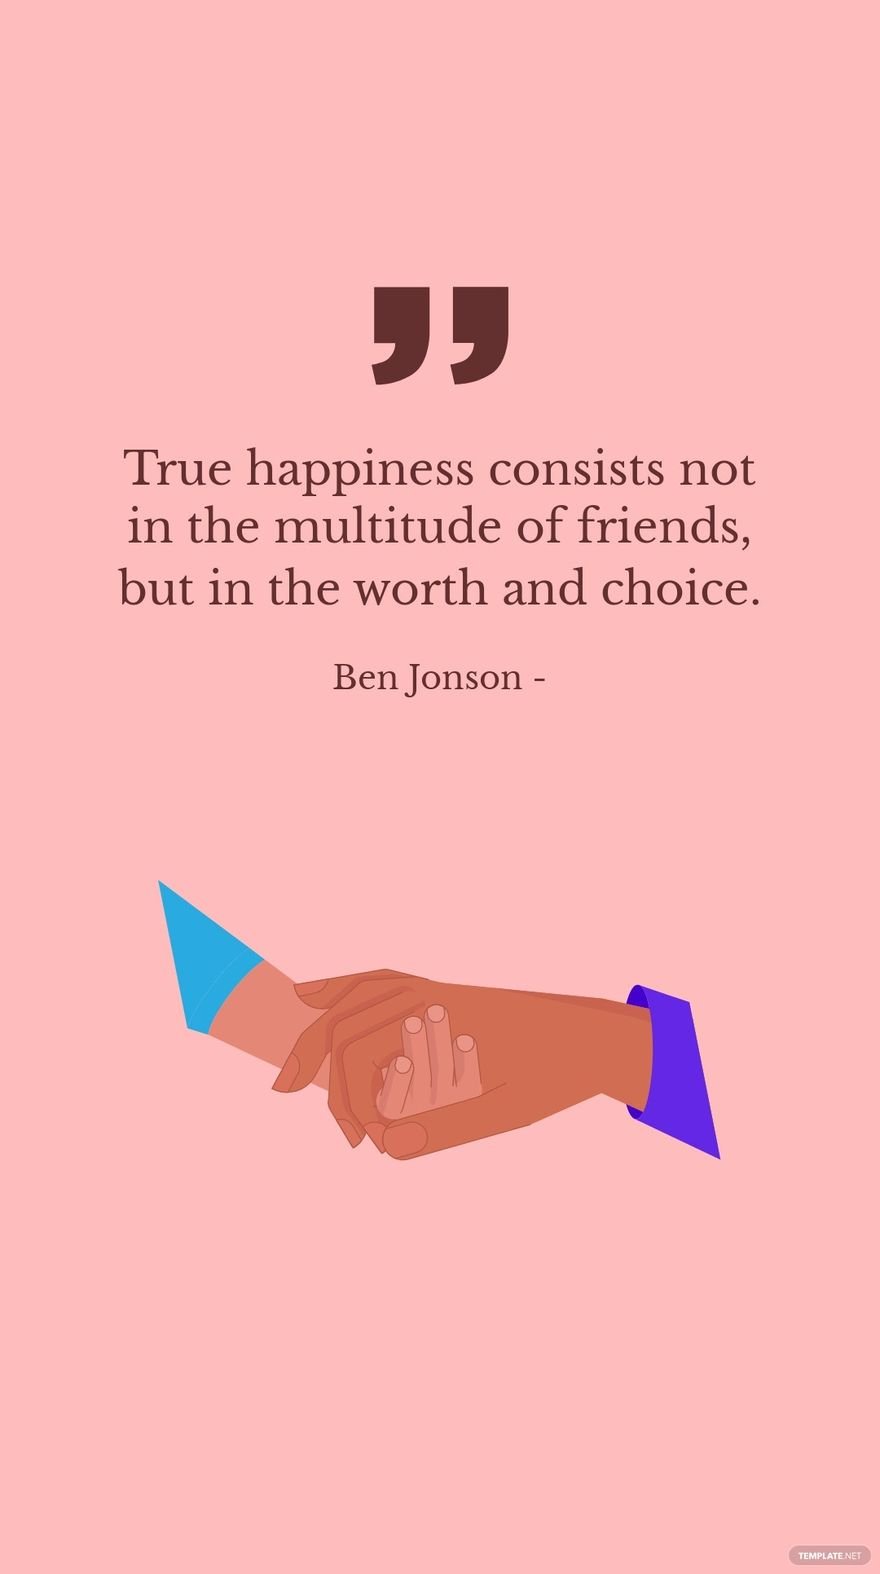 Ben Jonson - True happiness consists not in the multitude of friends, but in the worth and choice.